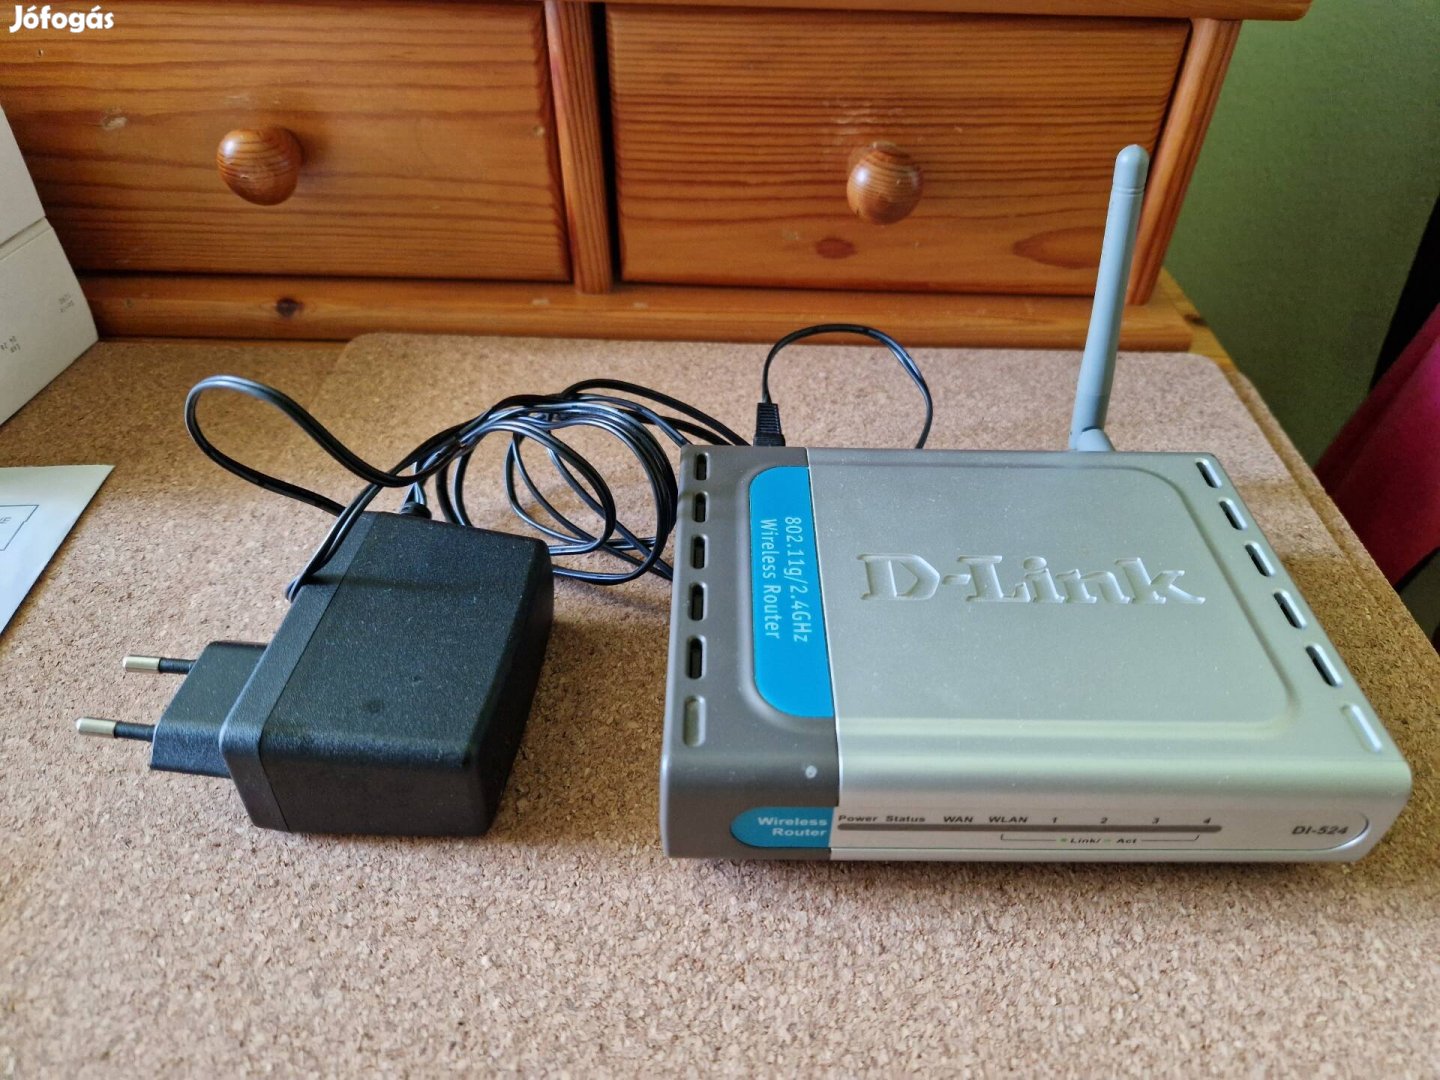 D-Link Wifi Router DI-524